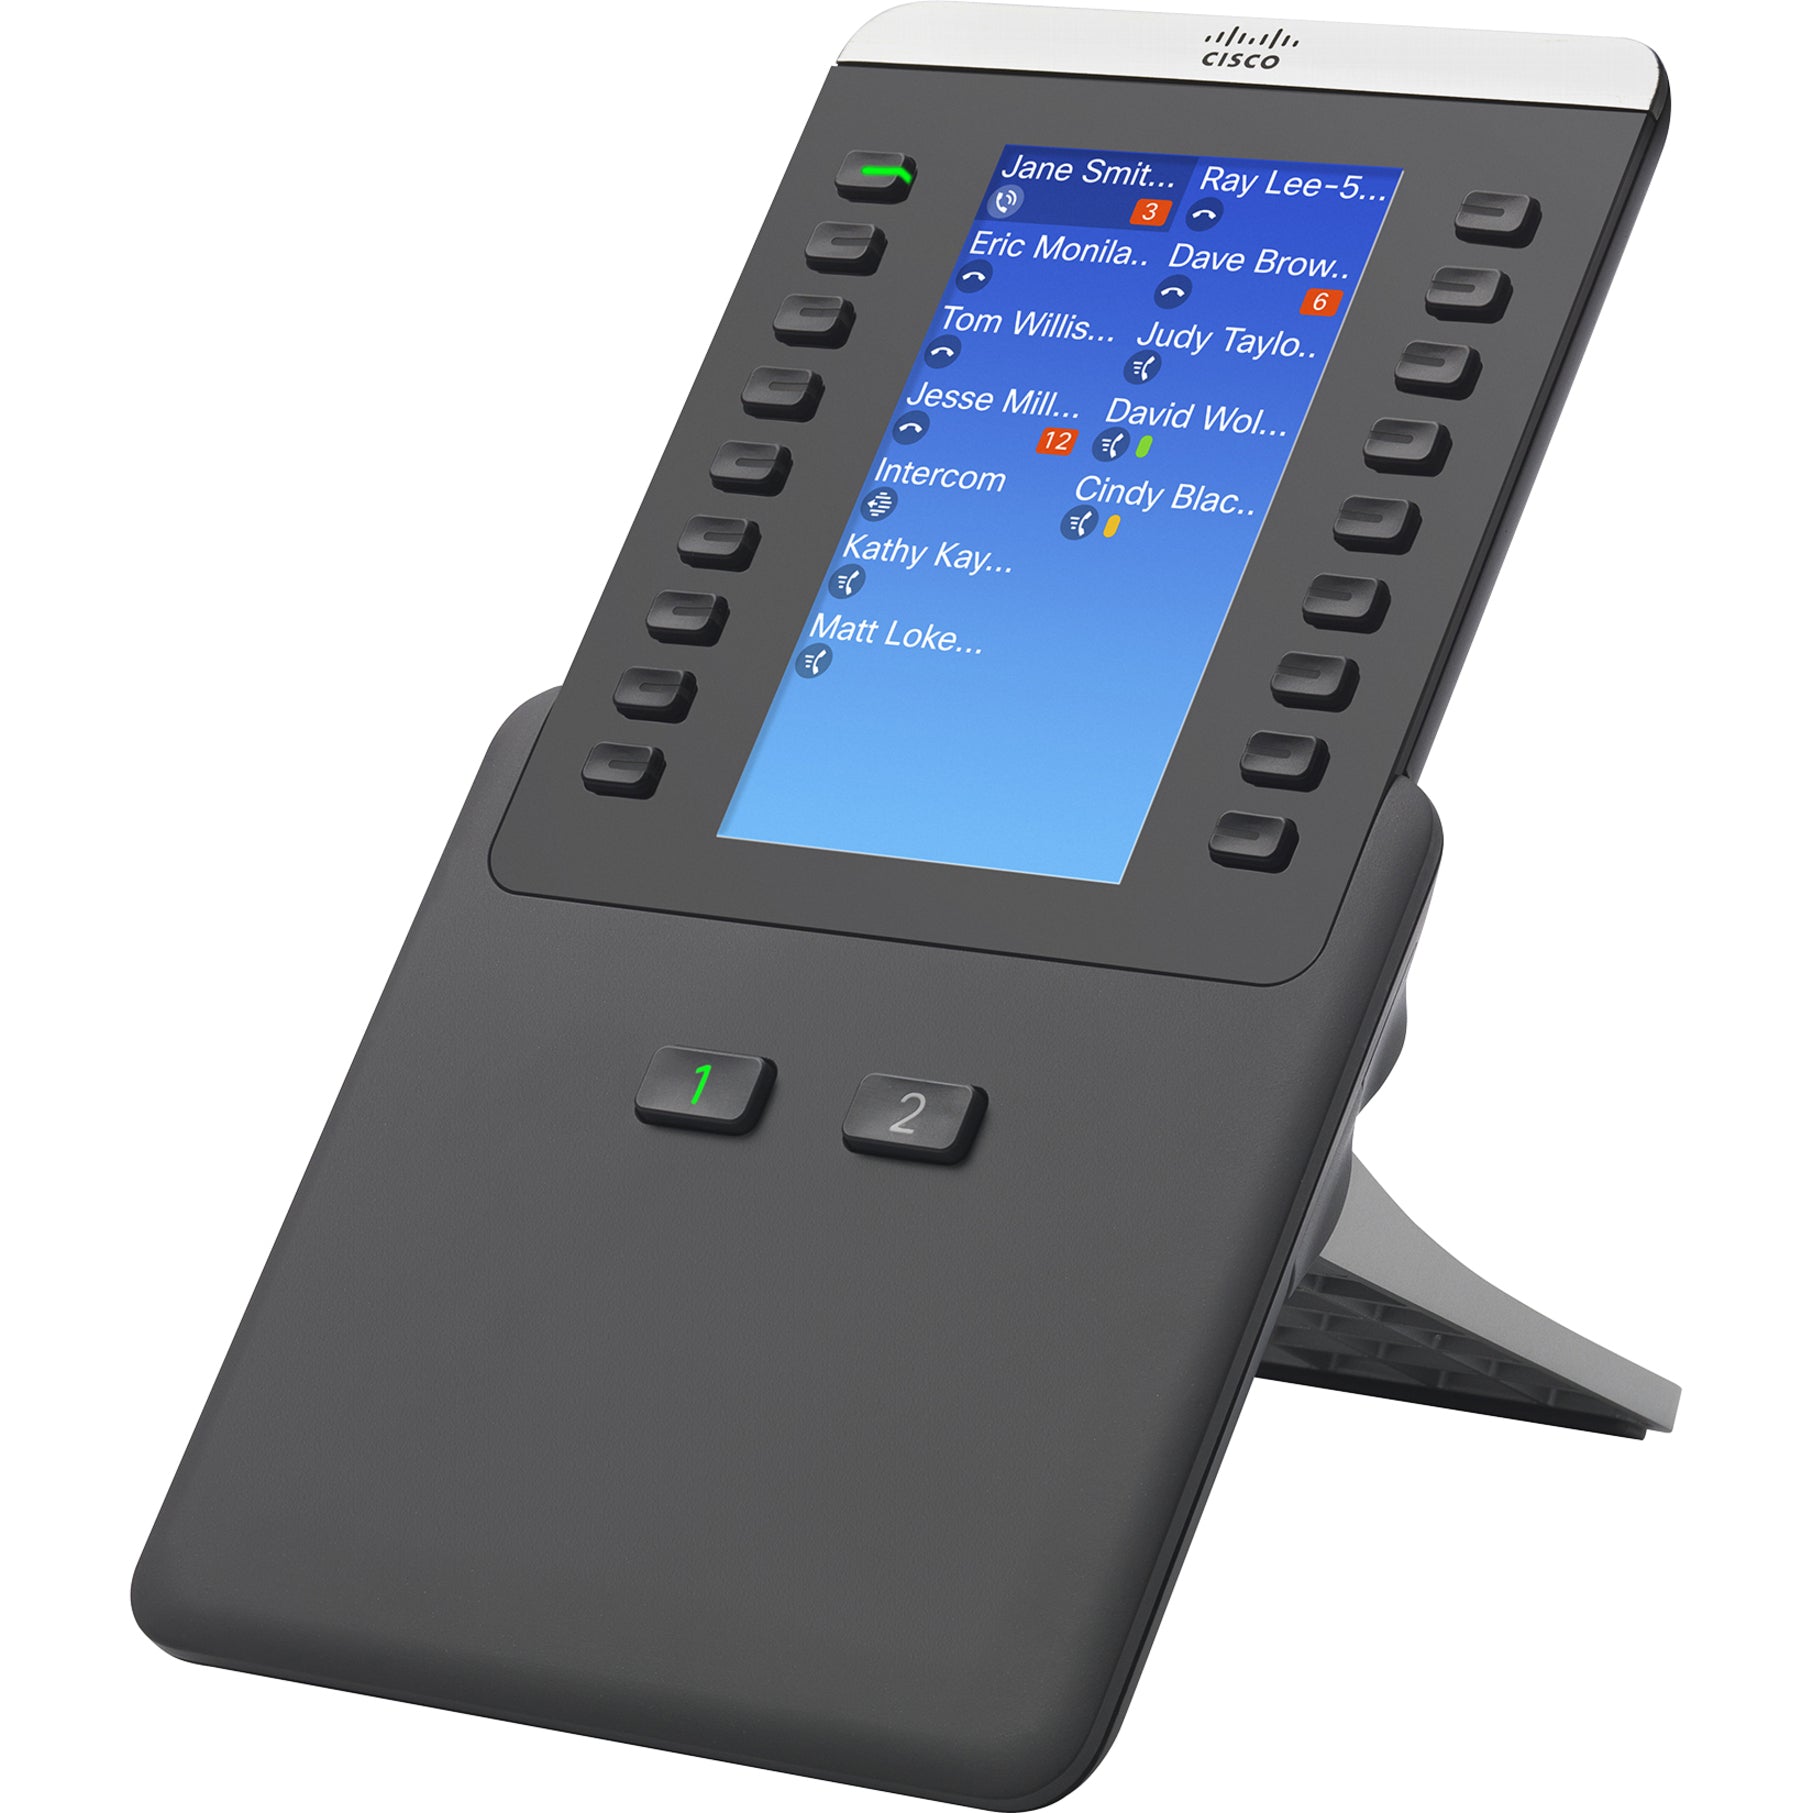 Cisco CP-8800-V-KEM= IP Phone 8800 Key Expansion Module, 3.5" LCD, Illuminated Buttons